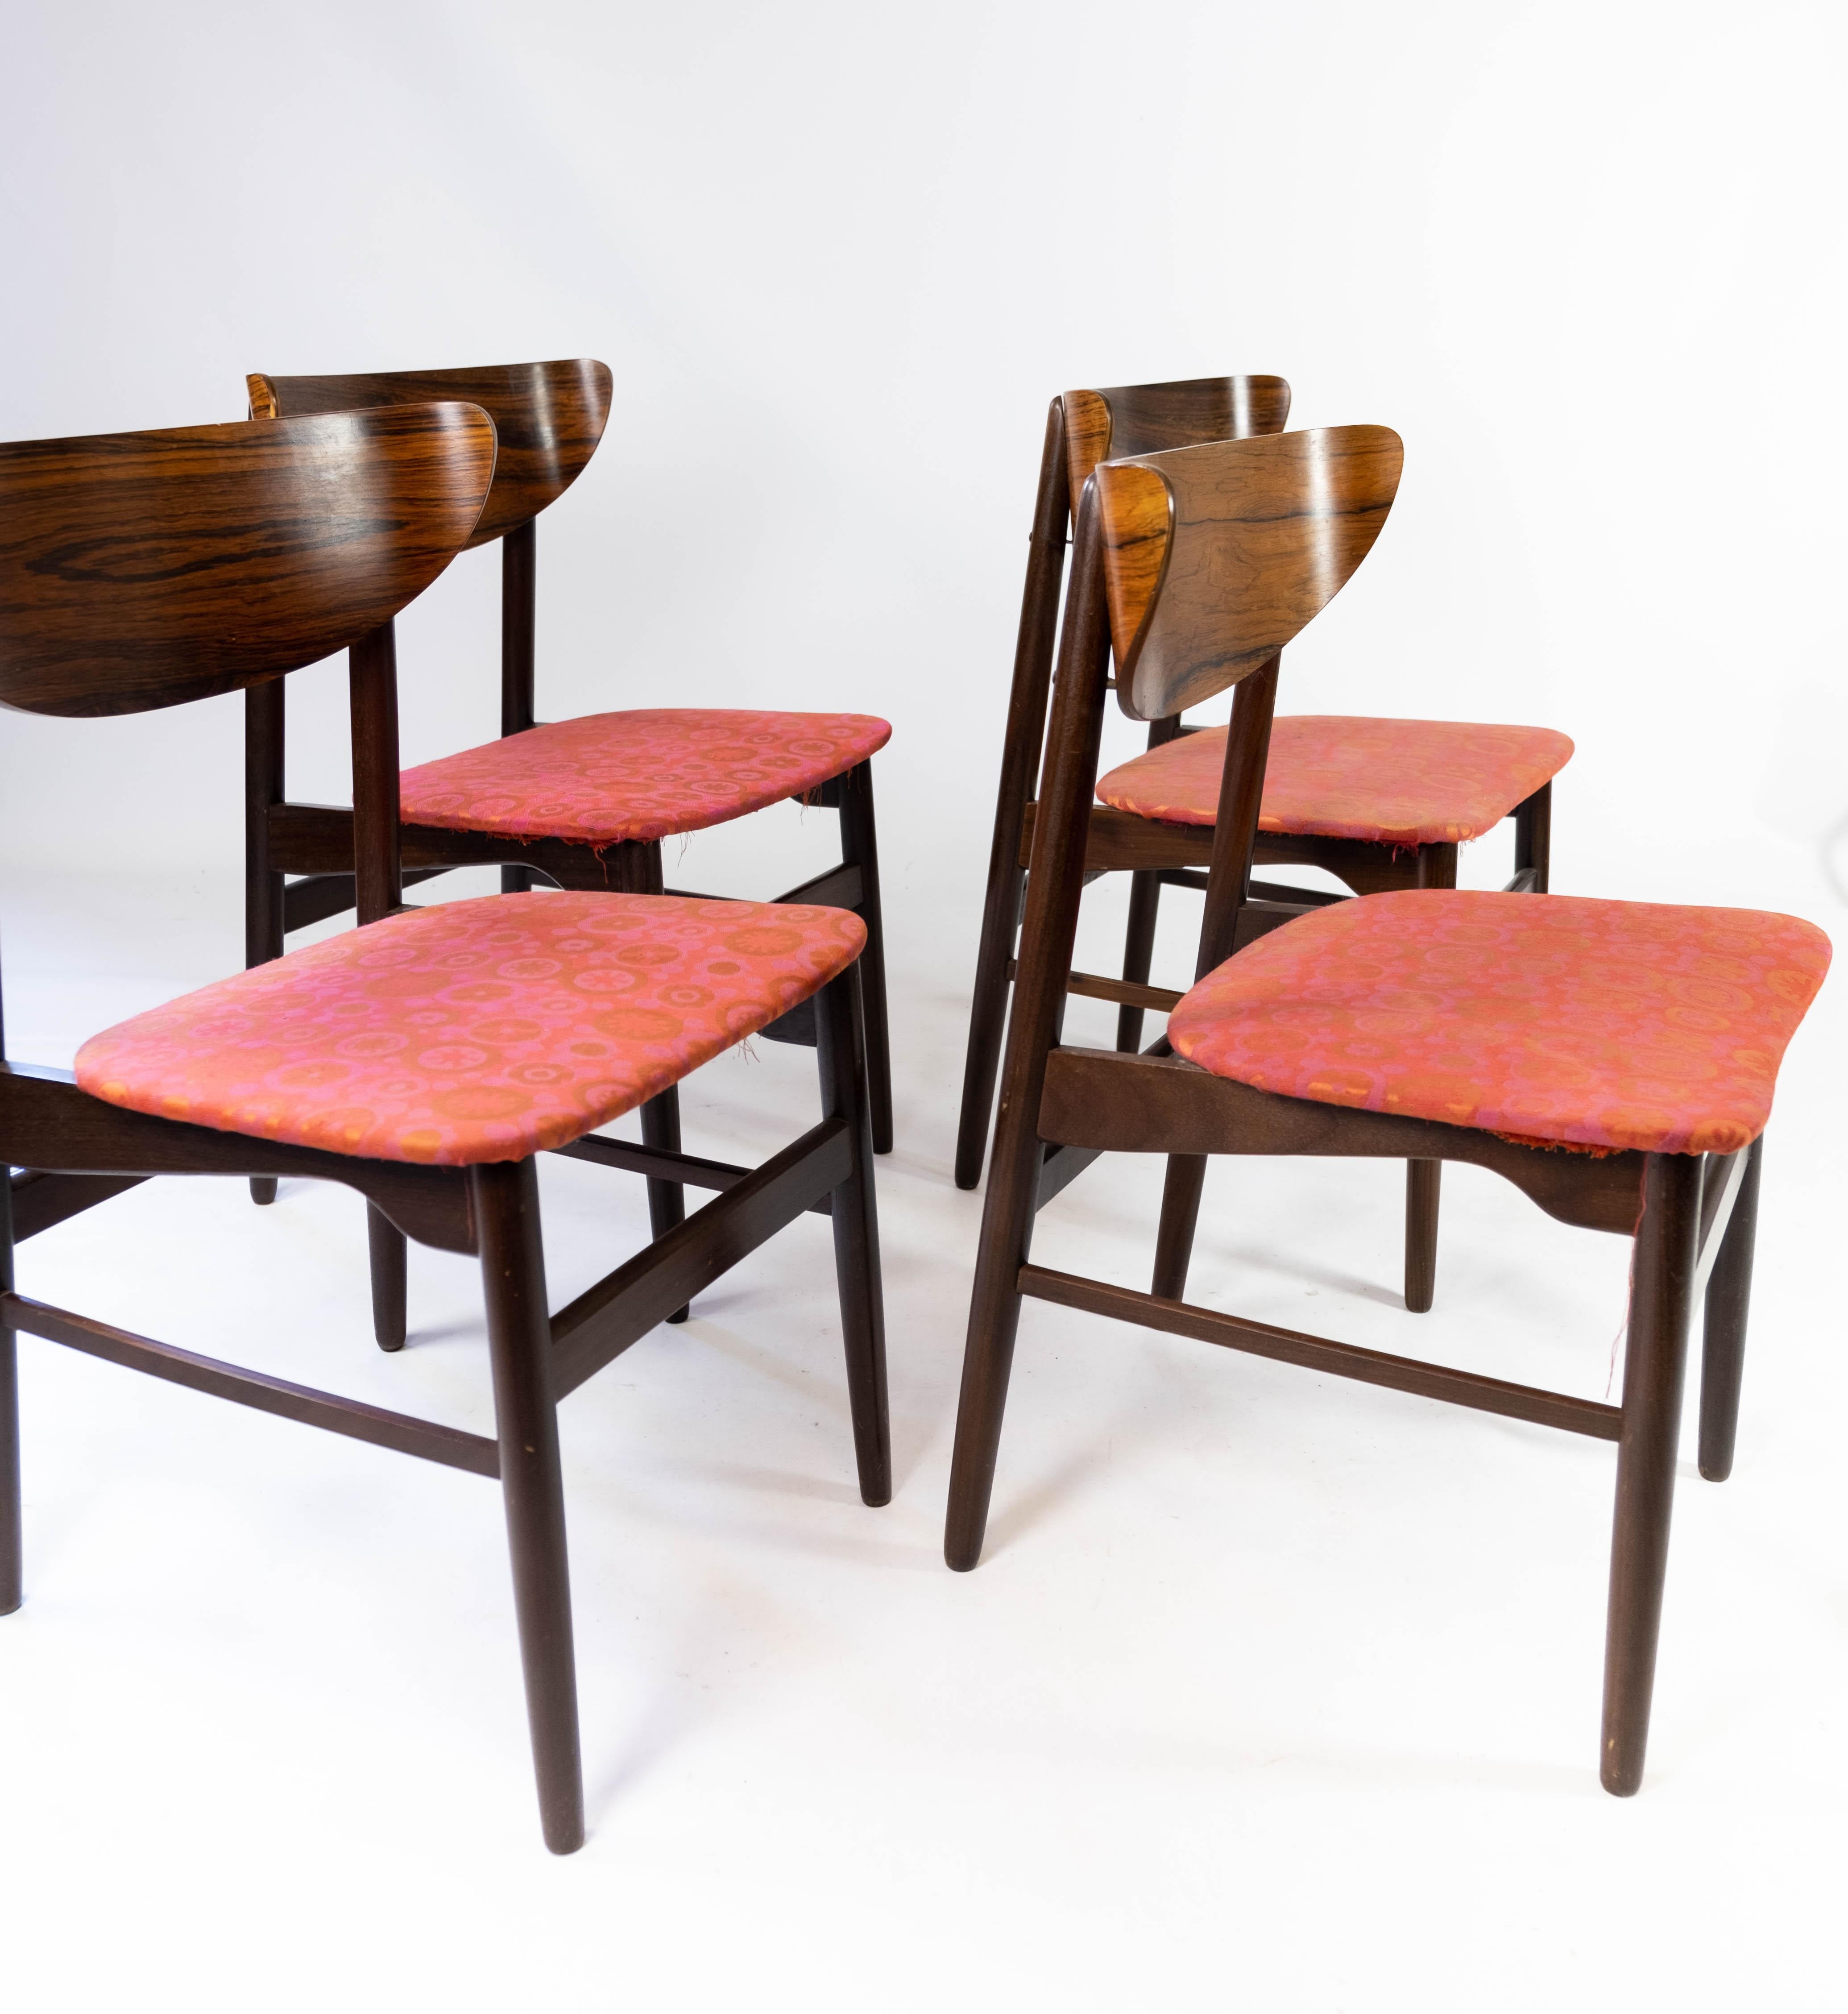 Set of Four Dining Room Chairs in Rosewood, of Danish Design, 1960s For Sale 3